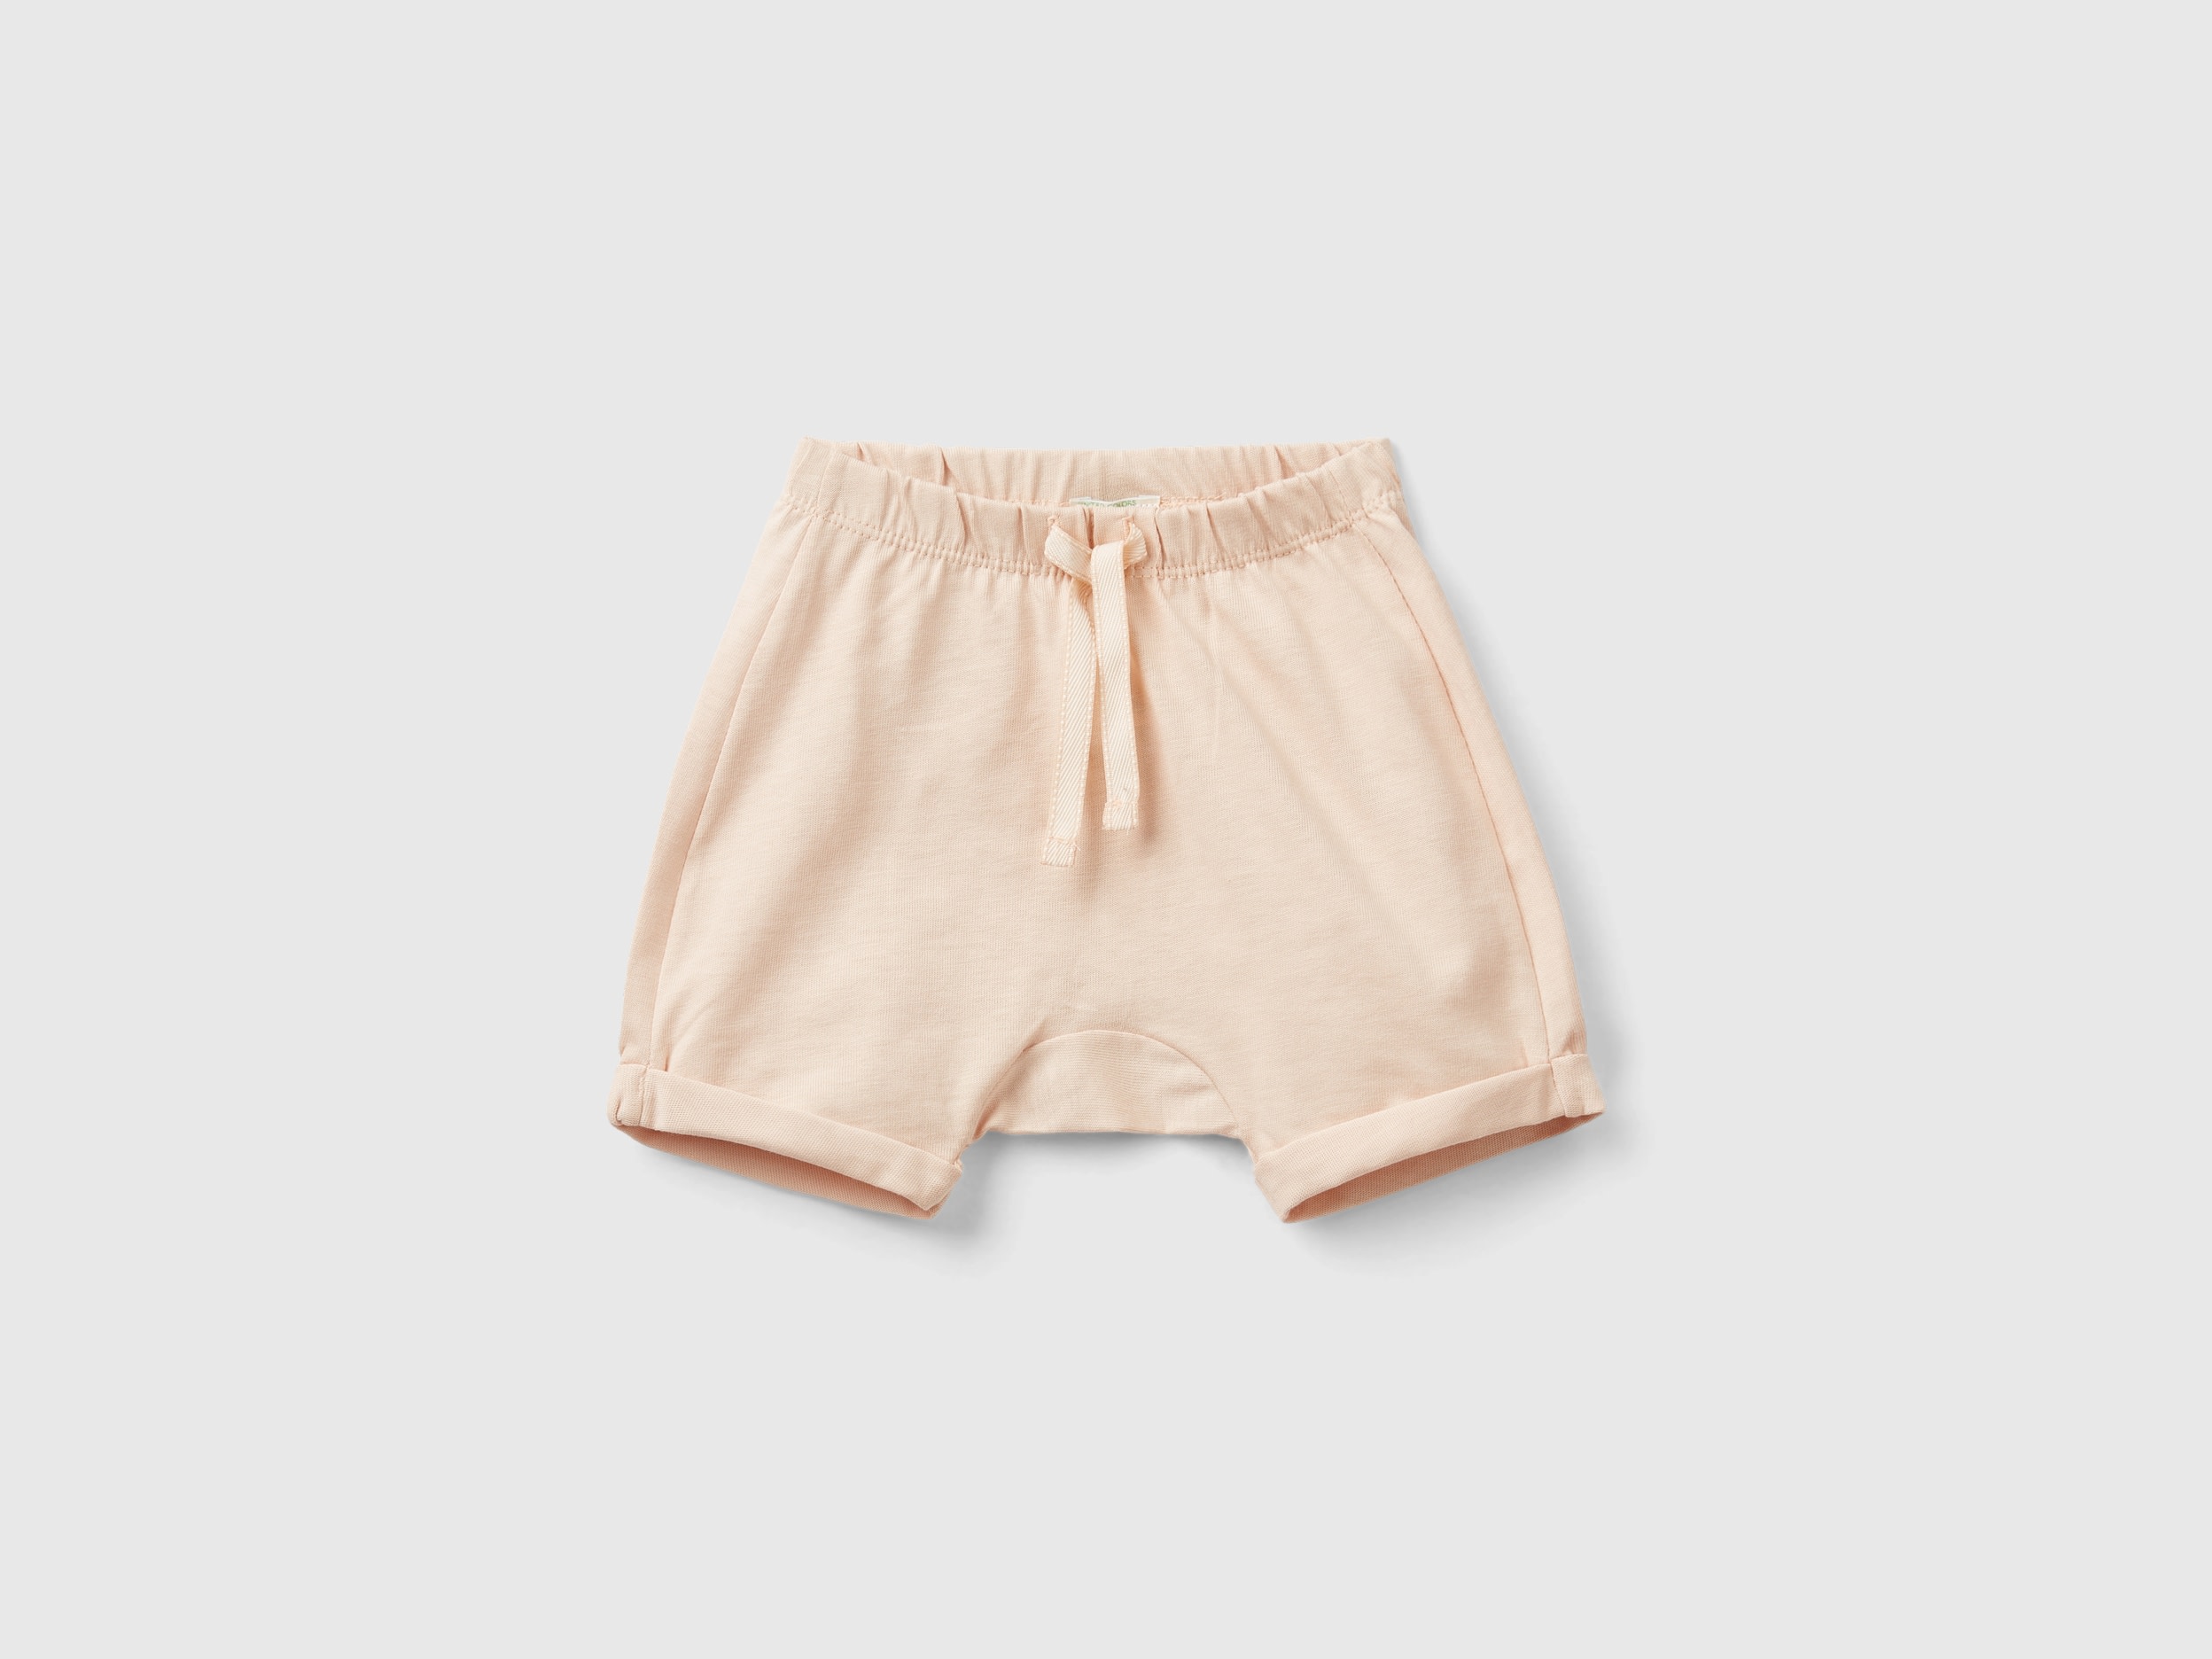 Image of Benetton, Shorts With Patch On The Back, size 50, Peach, Kids